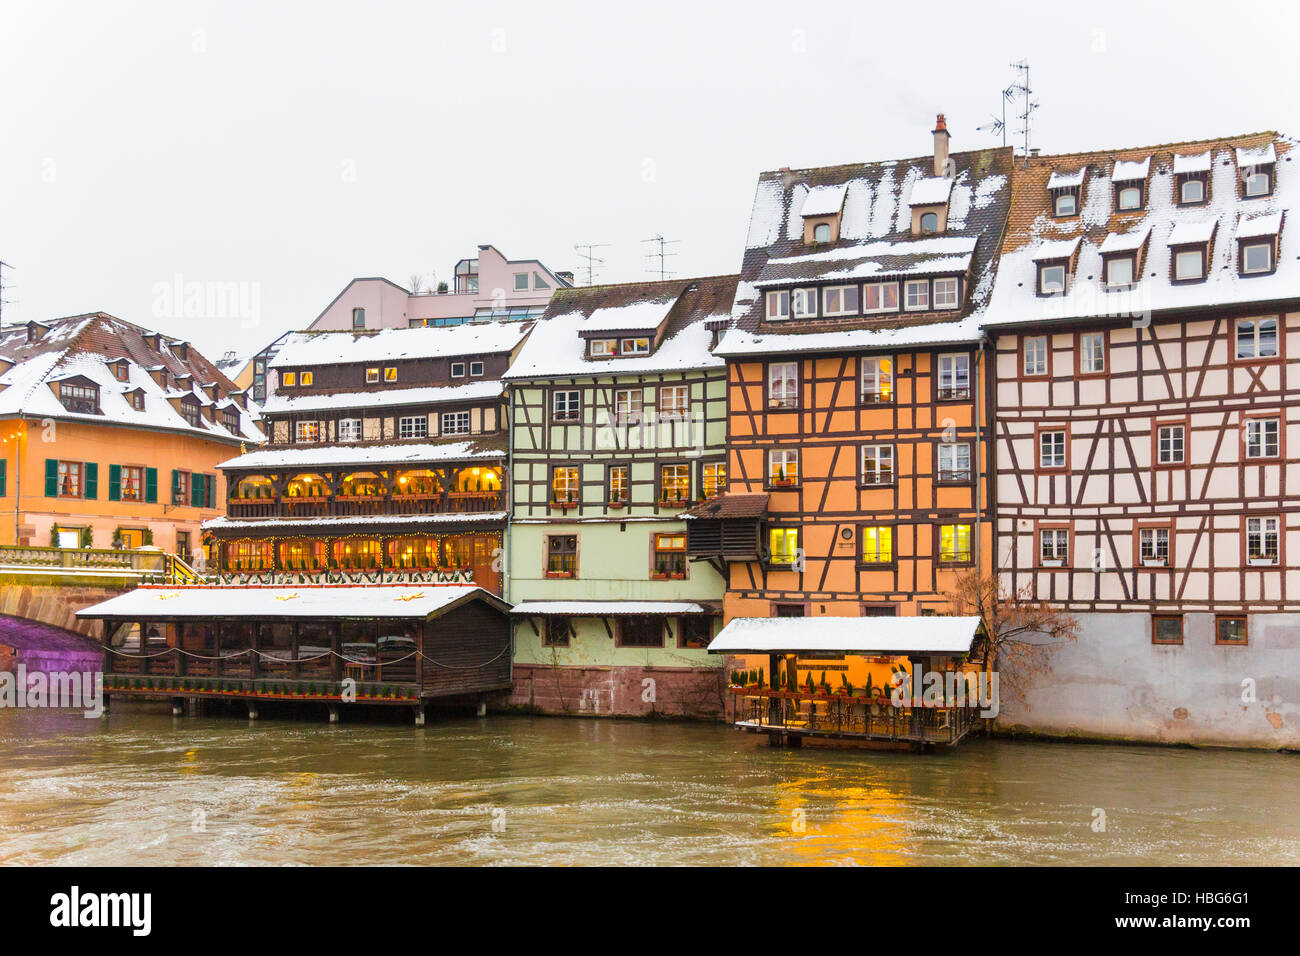 Half timbered houses on Petite France or Llittle France at wintertime old town, Strasbourg, Alsace, Bas Rhin, France, Europe Stock Photo